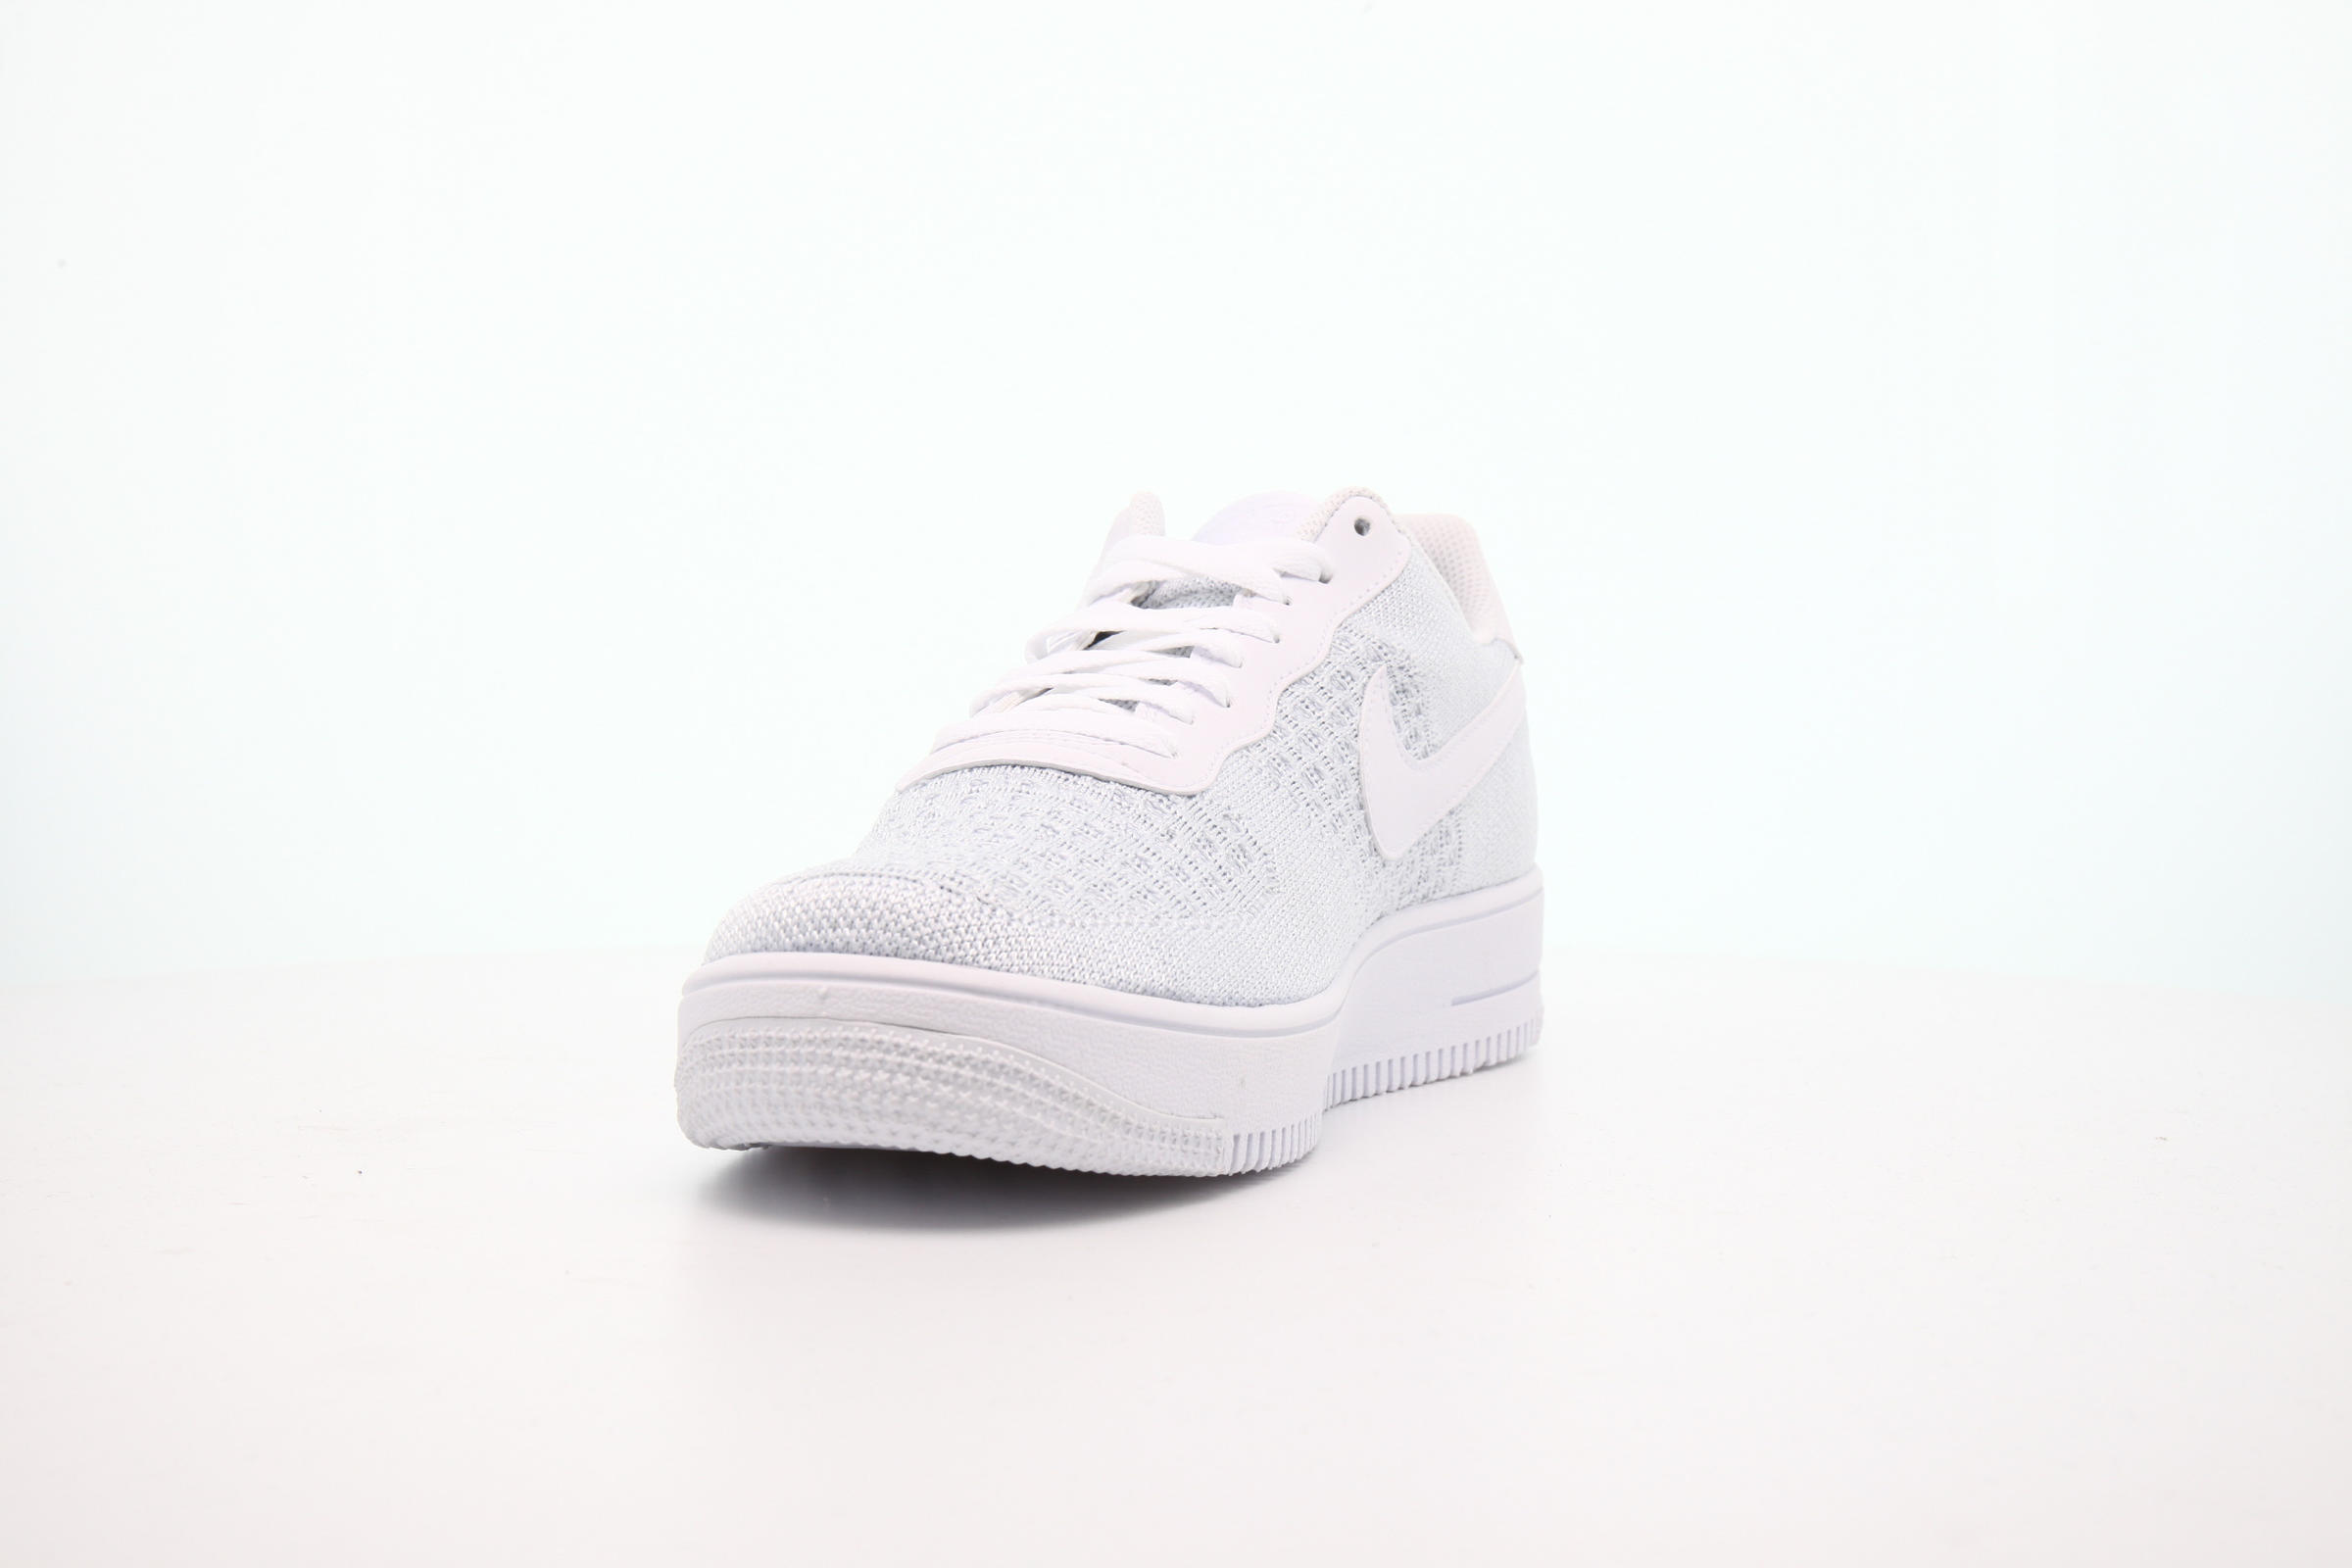 Nike AIR FORCE 1 FLYKNIT 2.0 "WHITE"